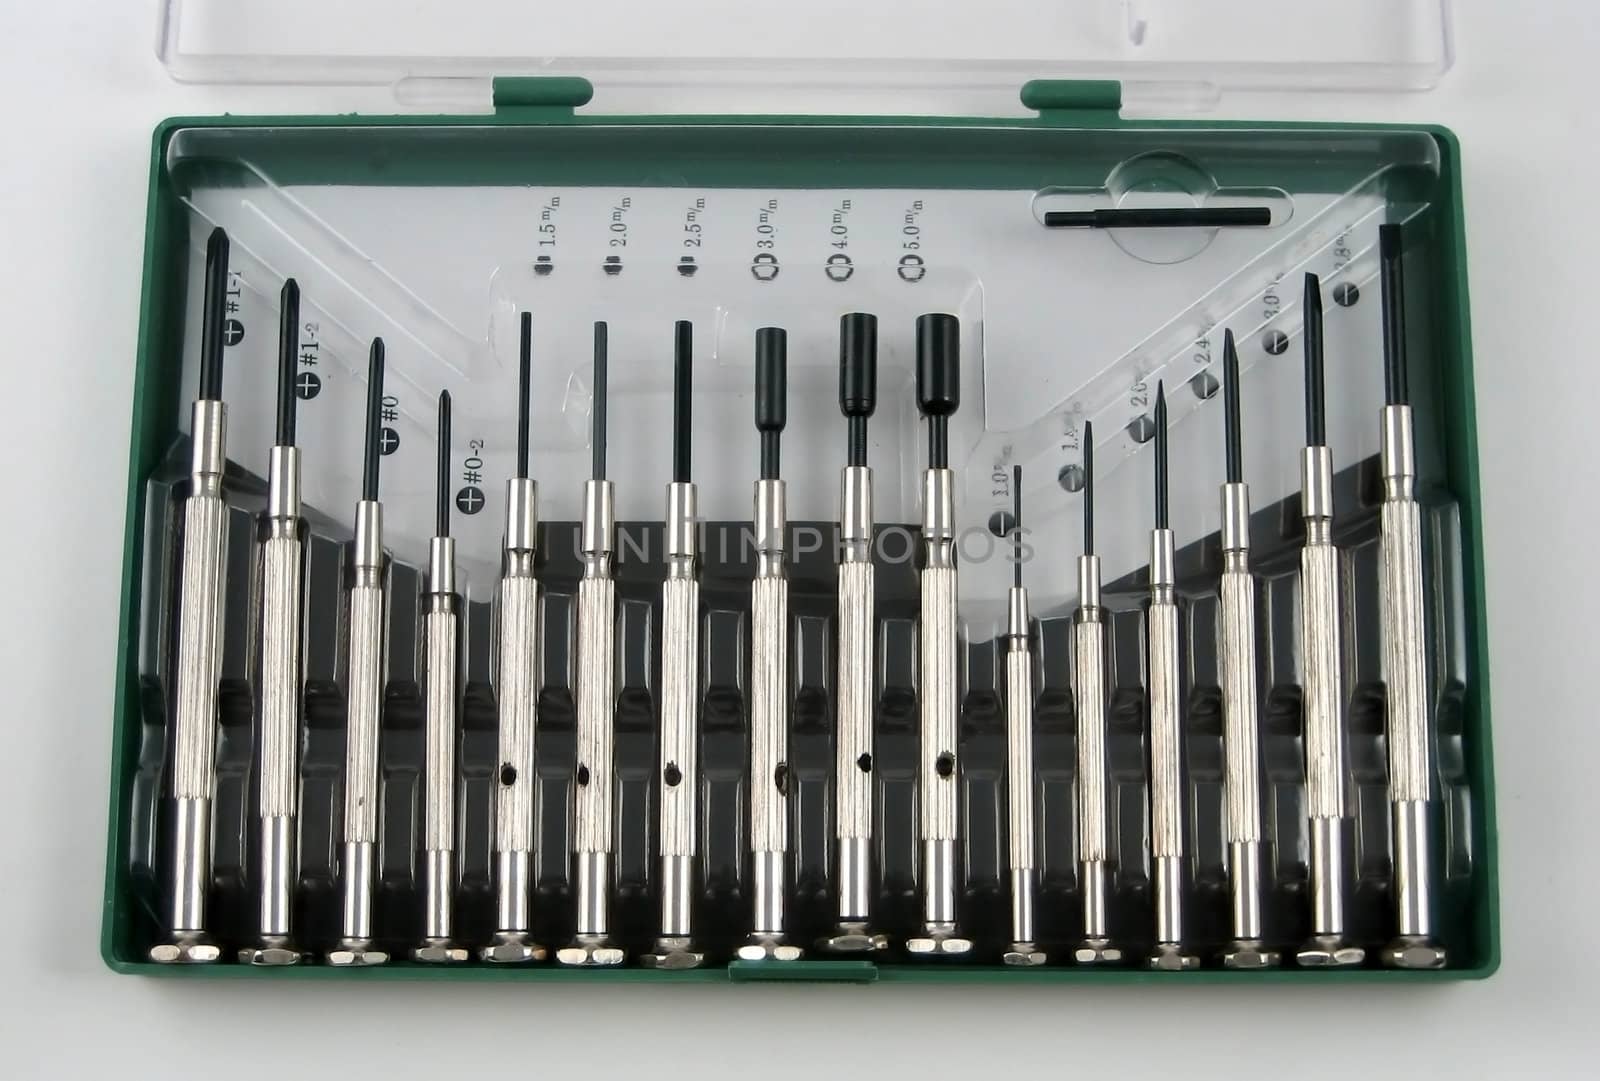 Pictures of small screwdrivers used for precision work